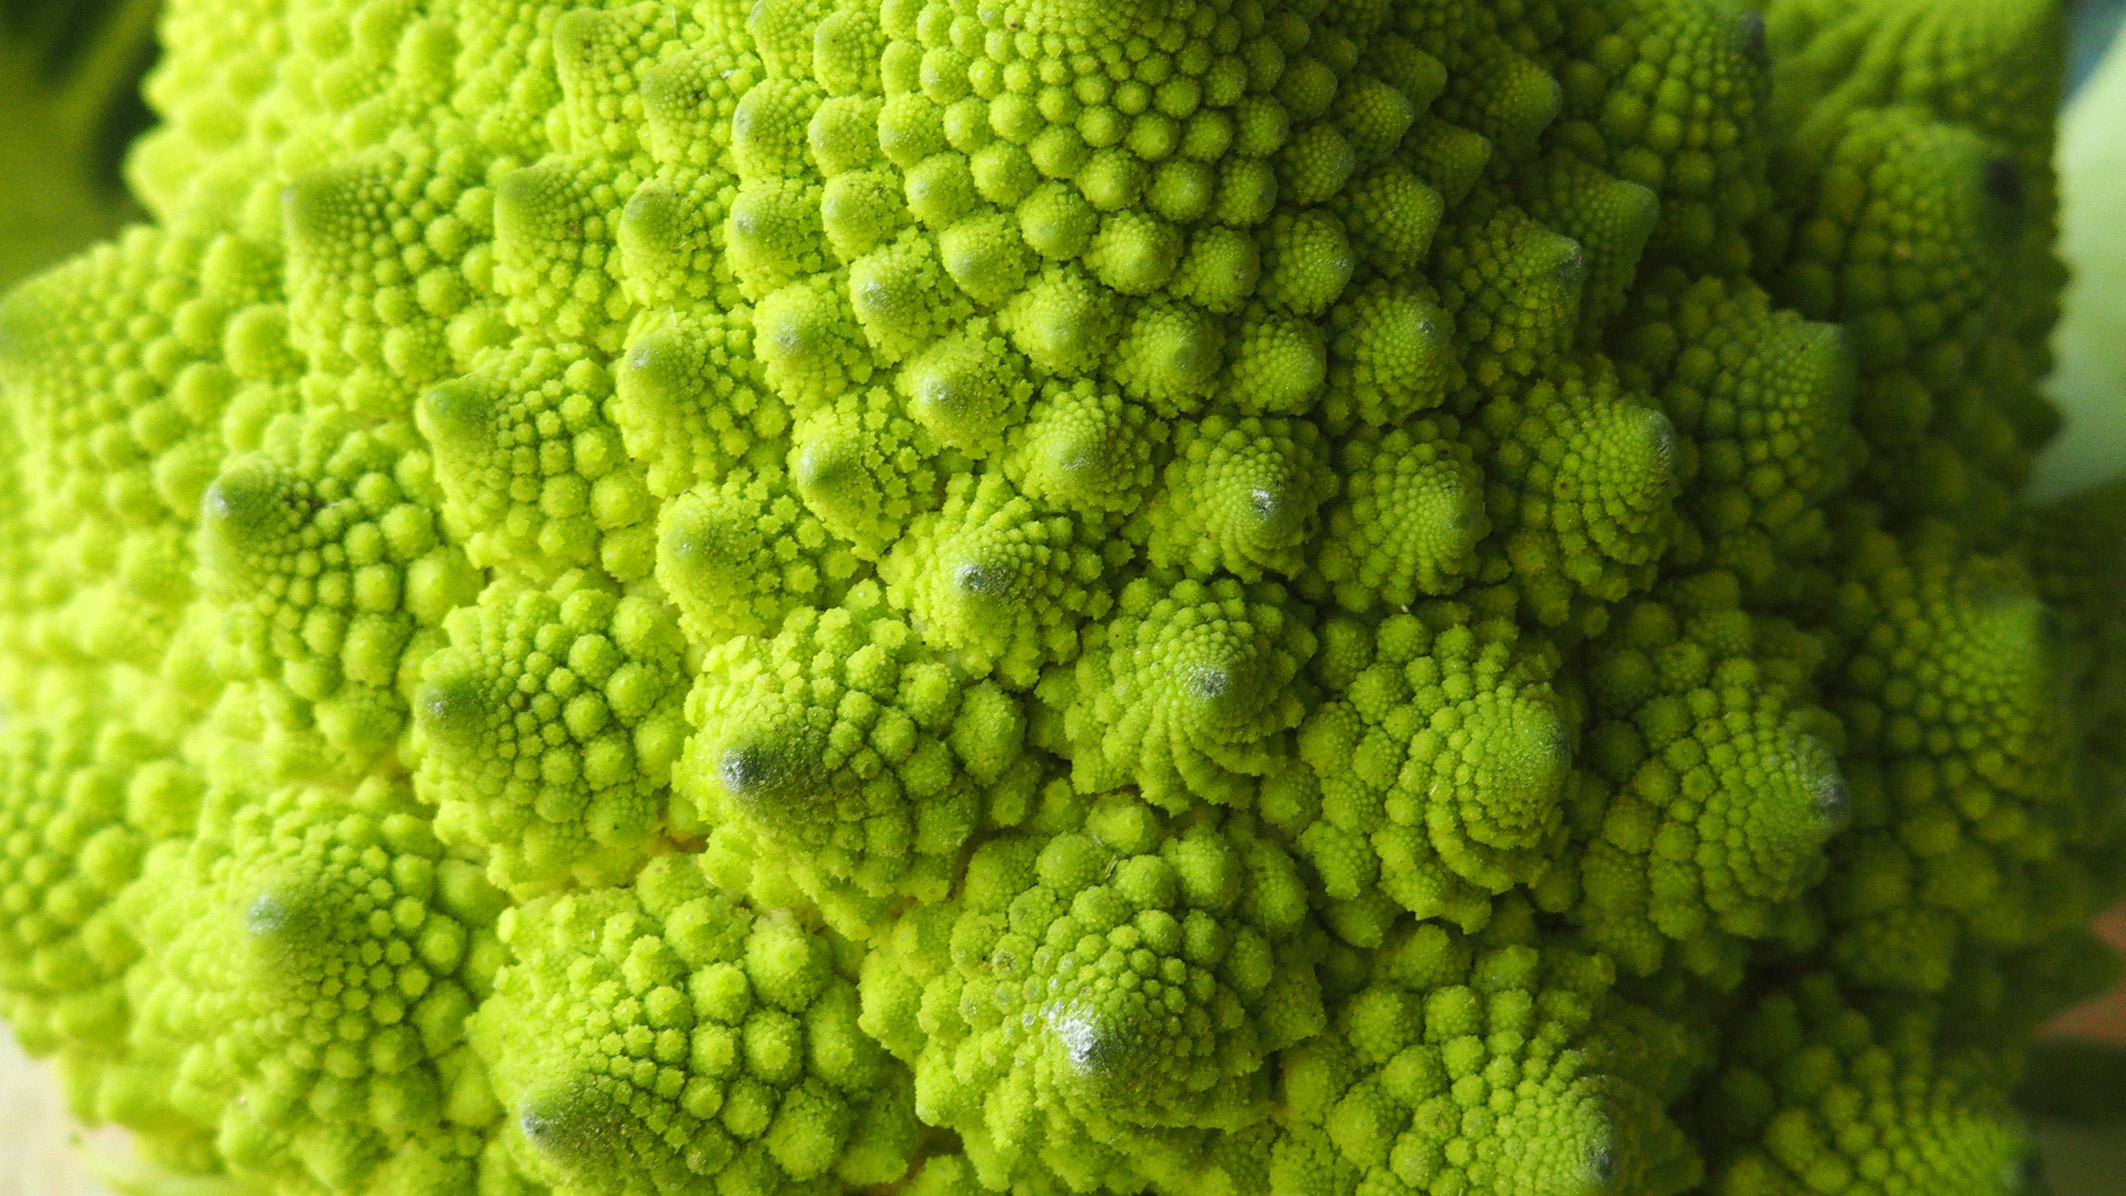 By the Age of 3, Children Appreciate Nature's Fractal Patterns